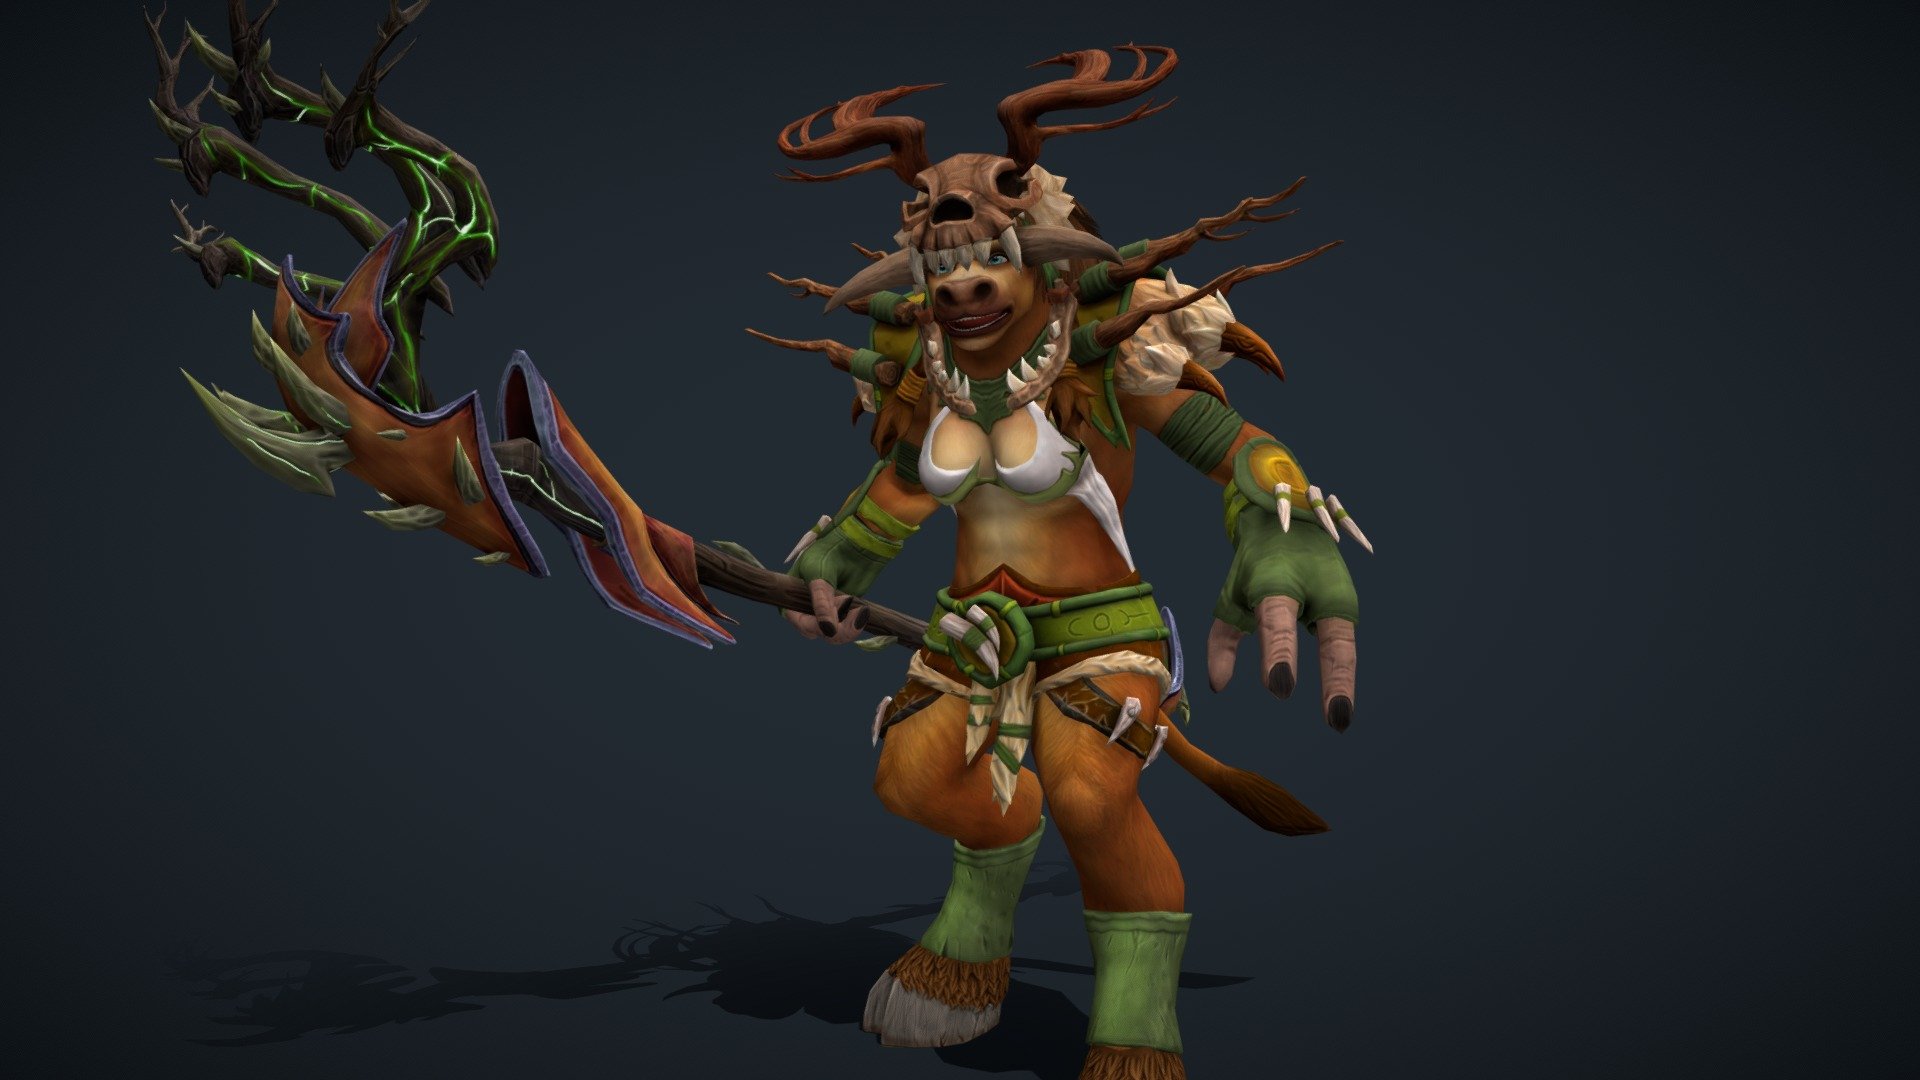 A Tauren Druid, based on my in game character :) 

This was the first character I made at Univerity! It had to be Under 20k tris and have up to 3 2k textues.

Heres a link to my artstation with more renders - https://www.artstation.com/artwork/ybNwvQ - Tauren Druid - 3D model by BeccyCollins 3d model